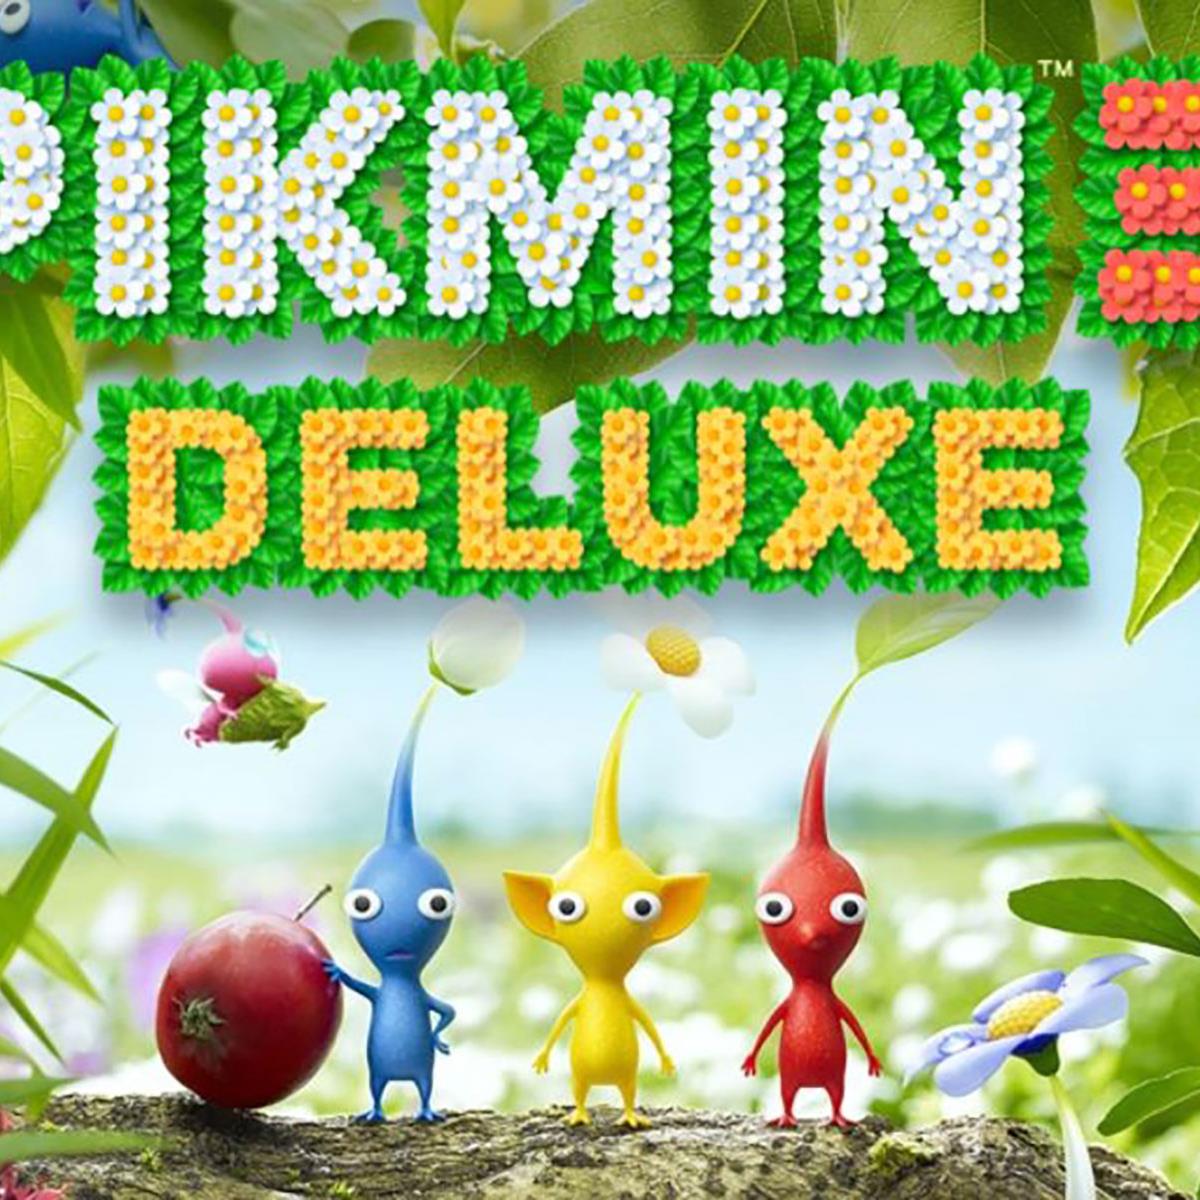 Pikmin 3 Deluxe Headed HotHardware In To With | Missions Nintendo Switch October New